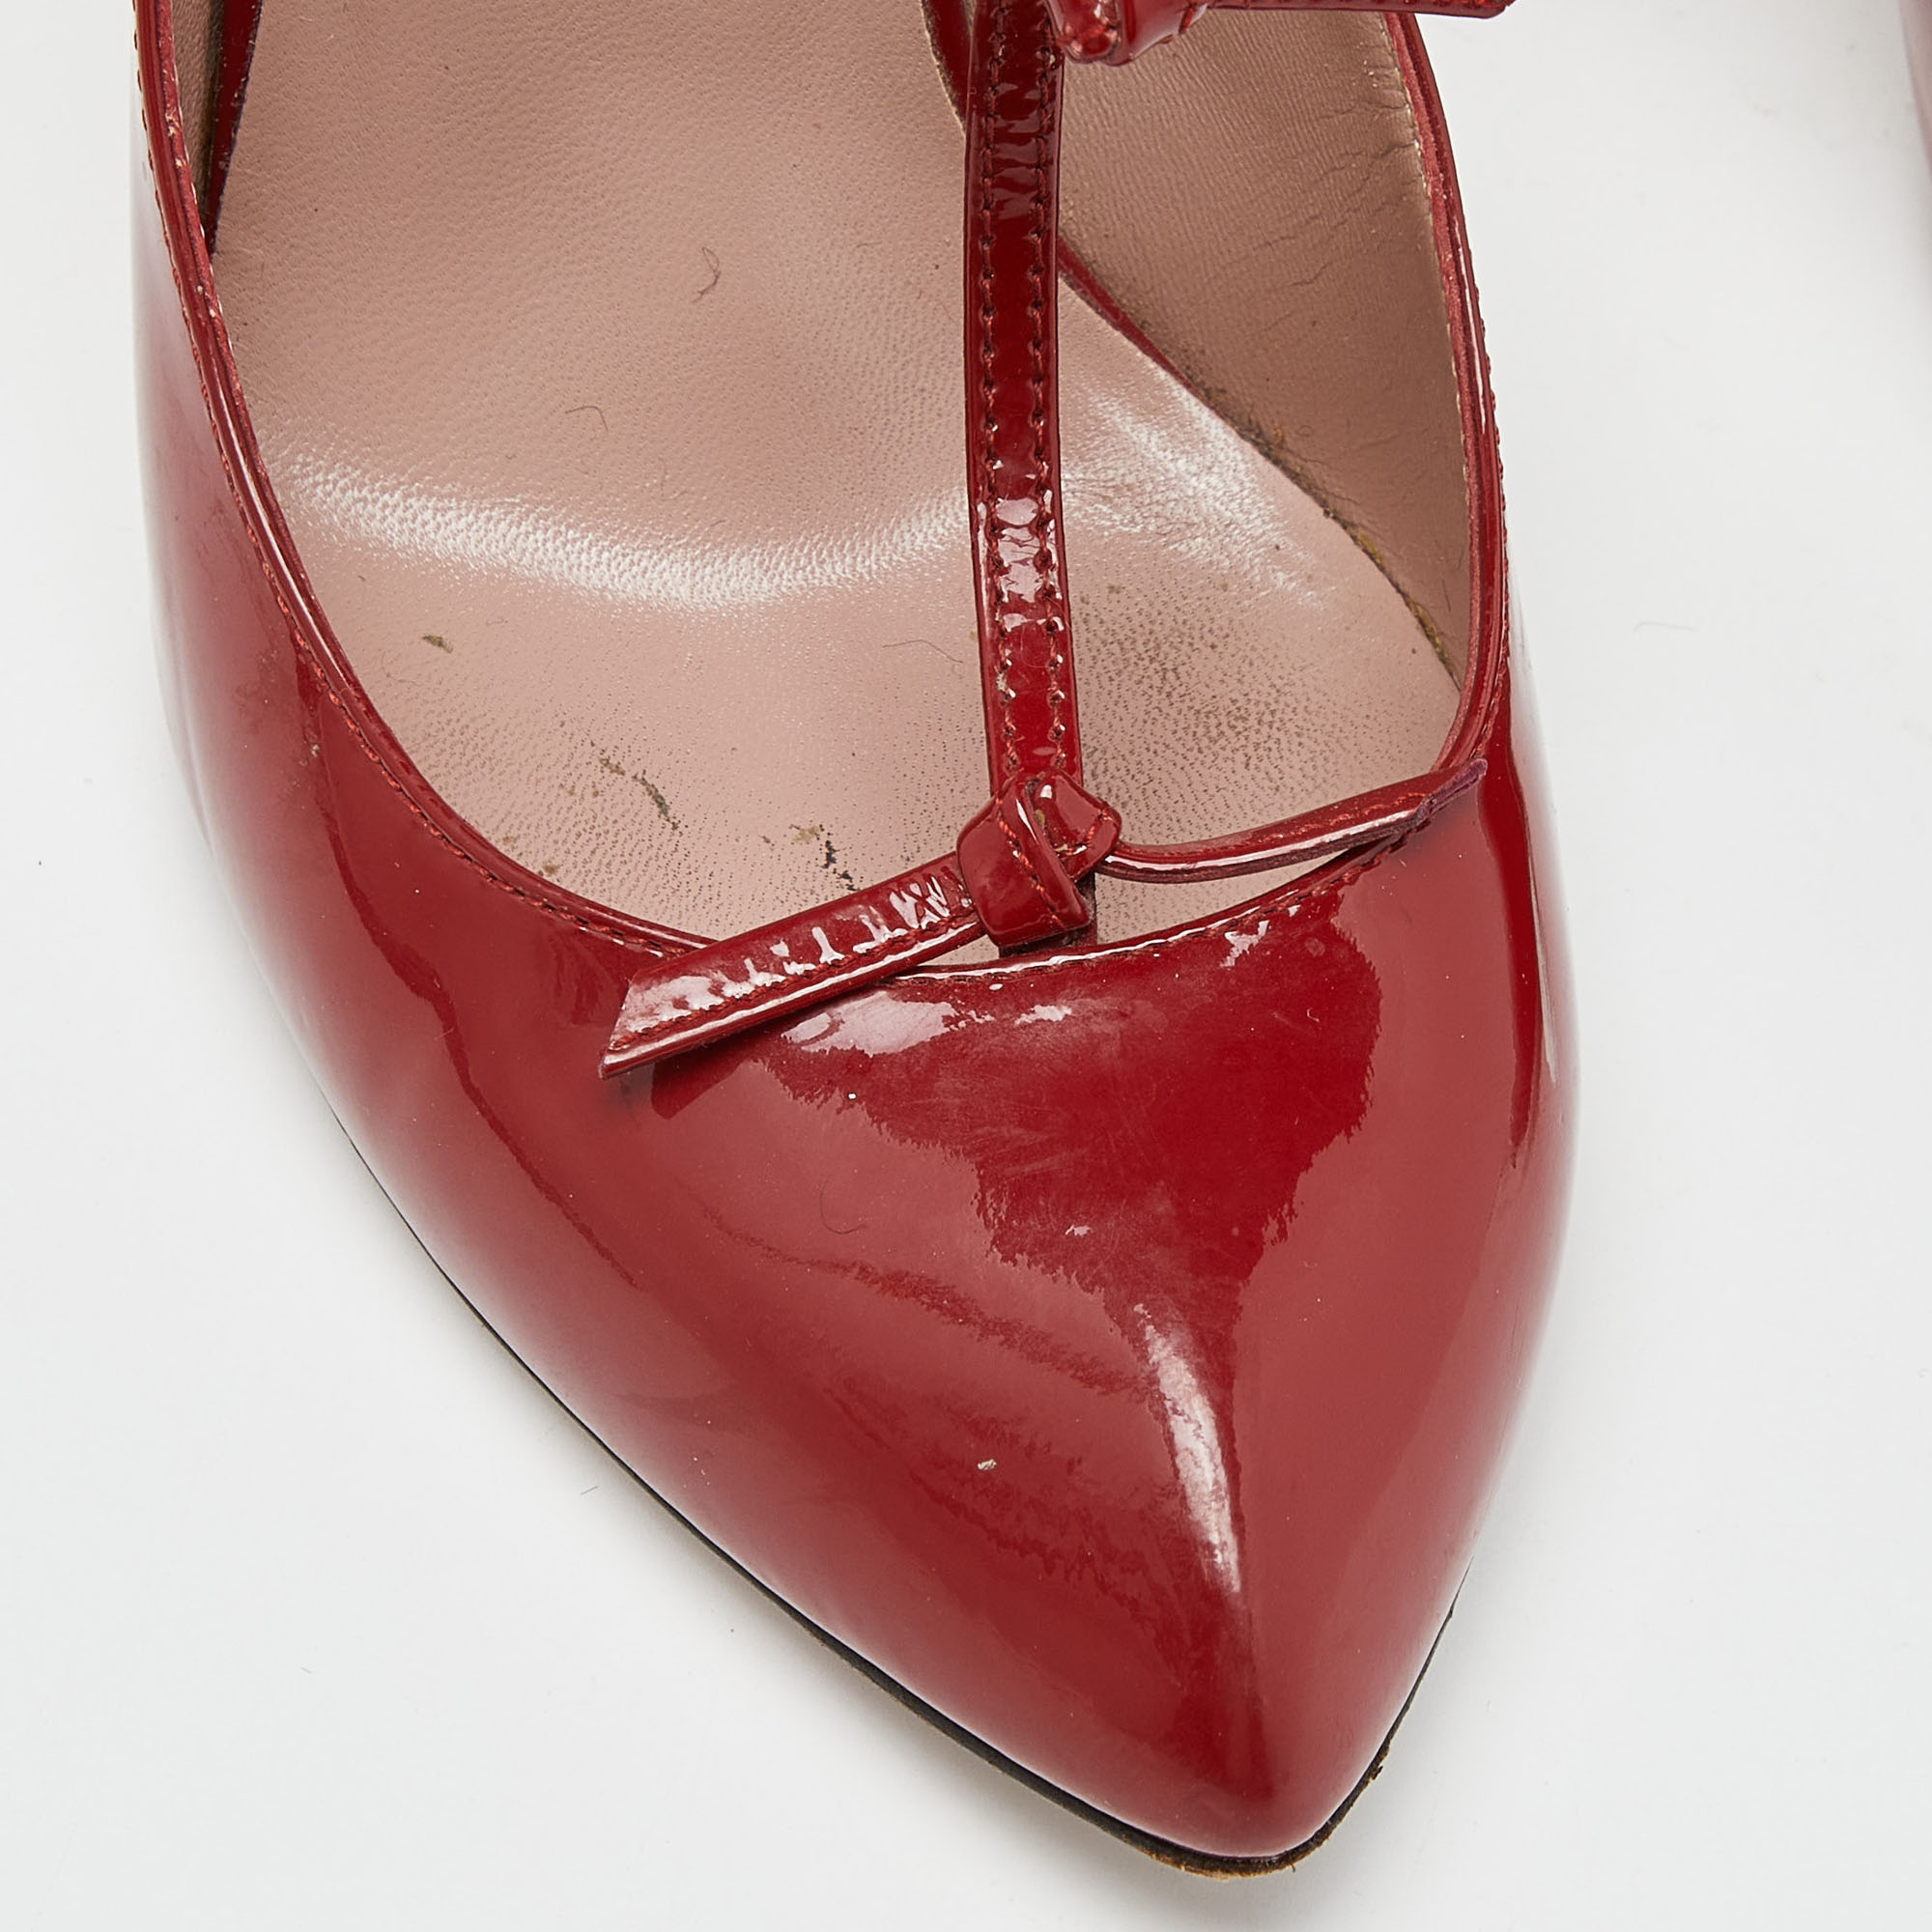 Gucci Red Patent Leather Knotted Bow T-Strap Pumps Size 36